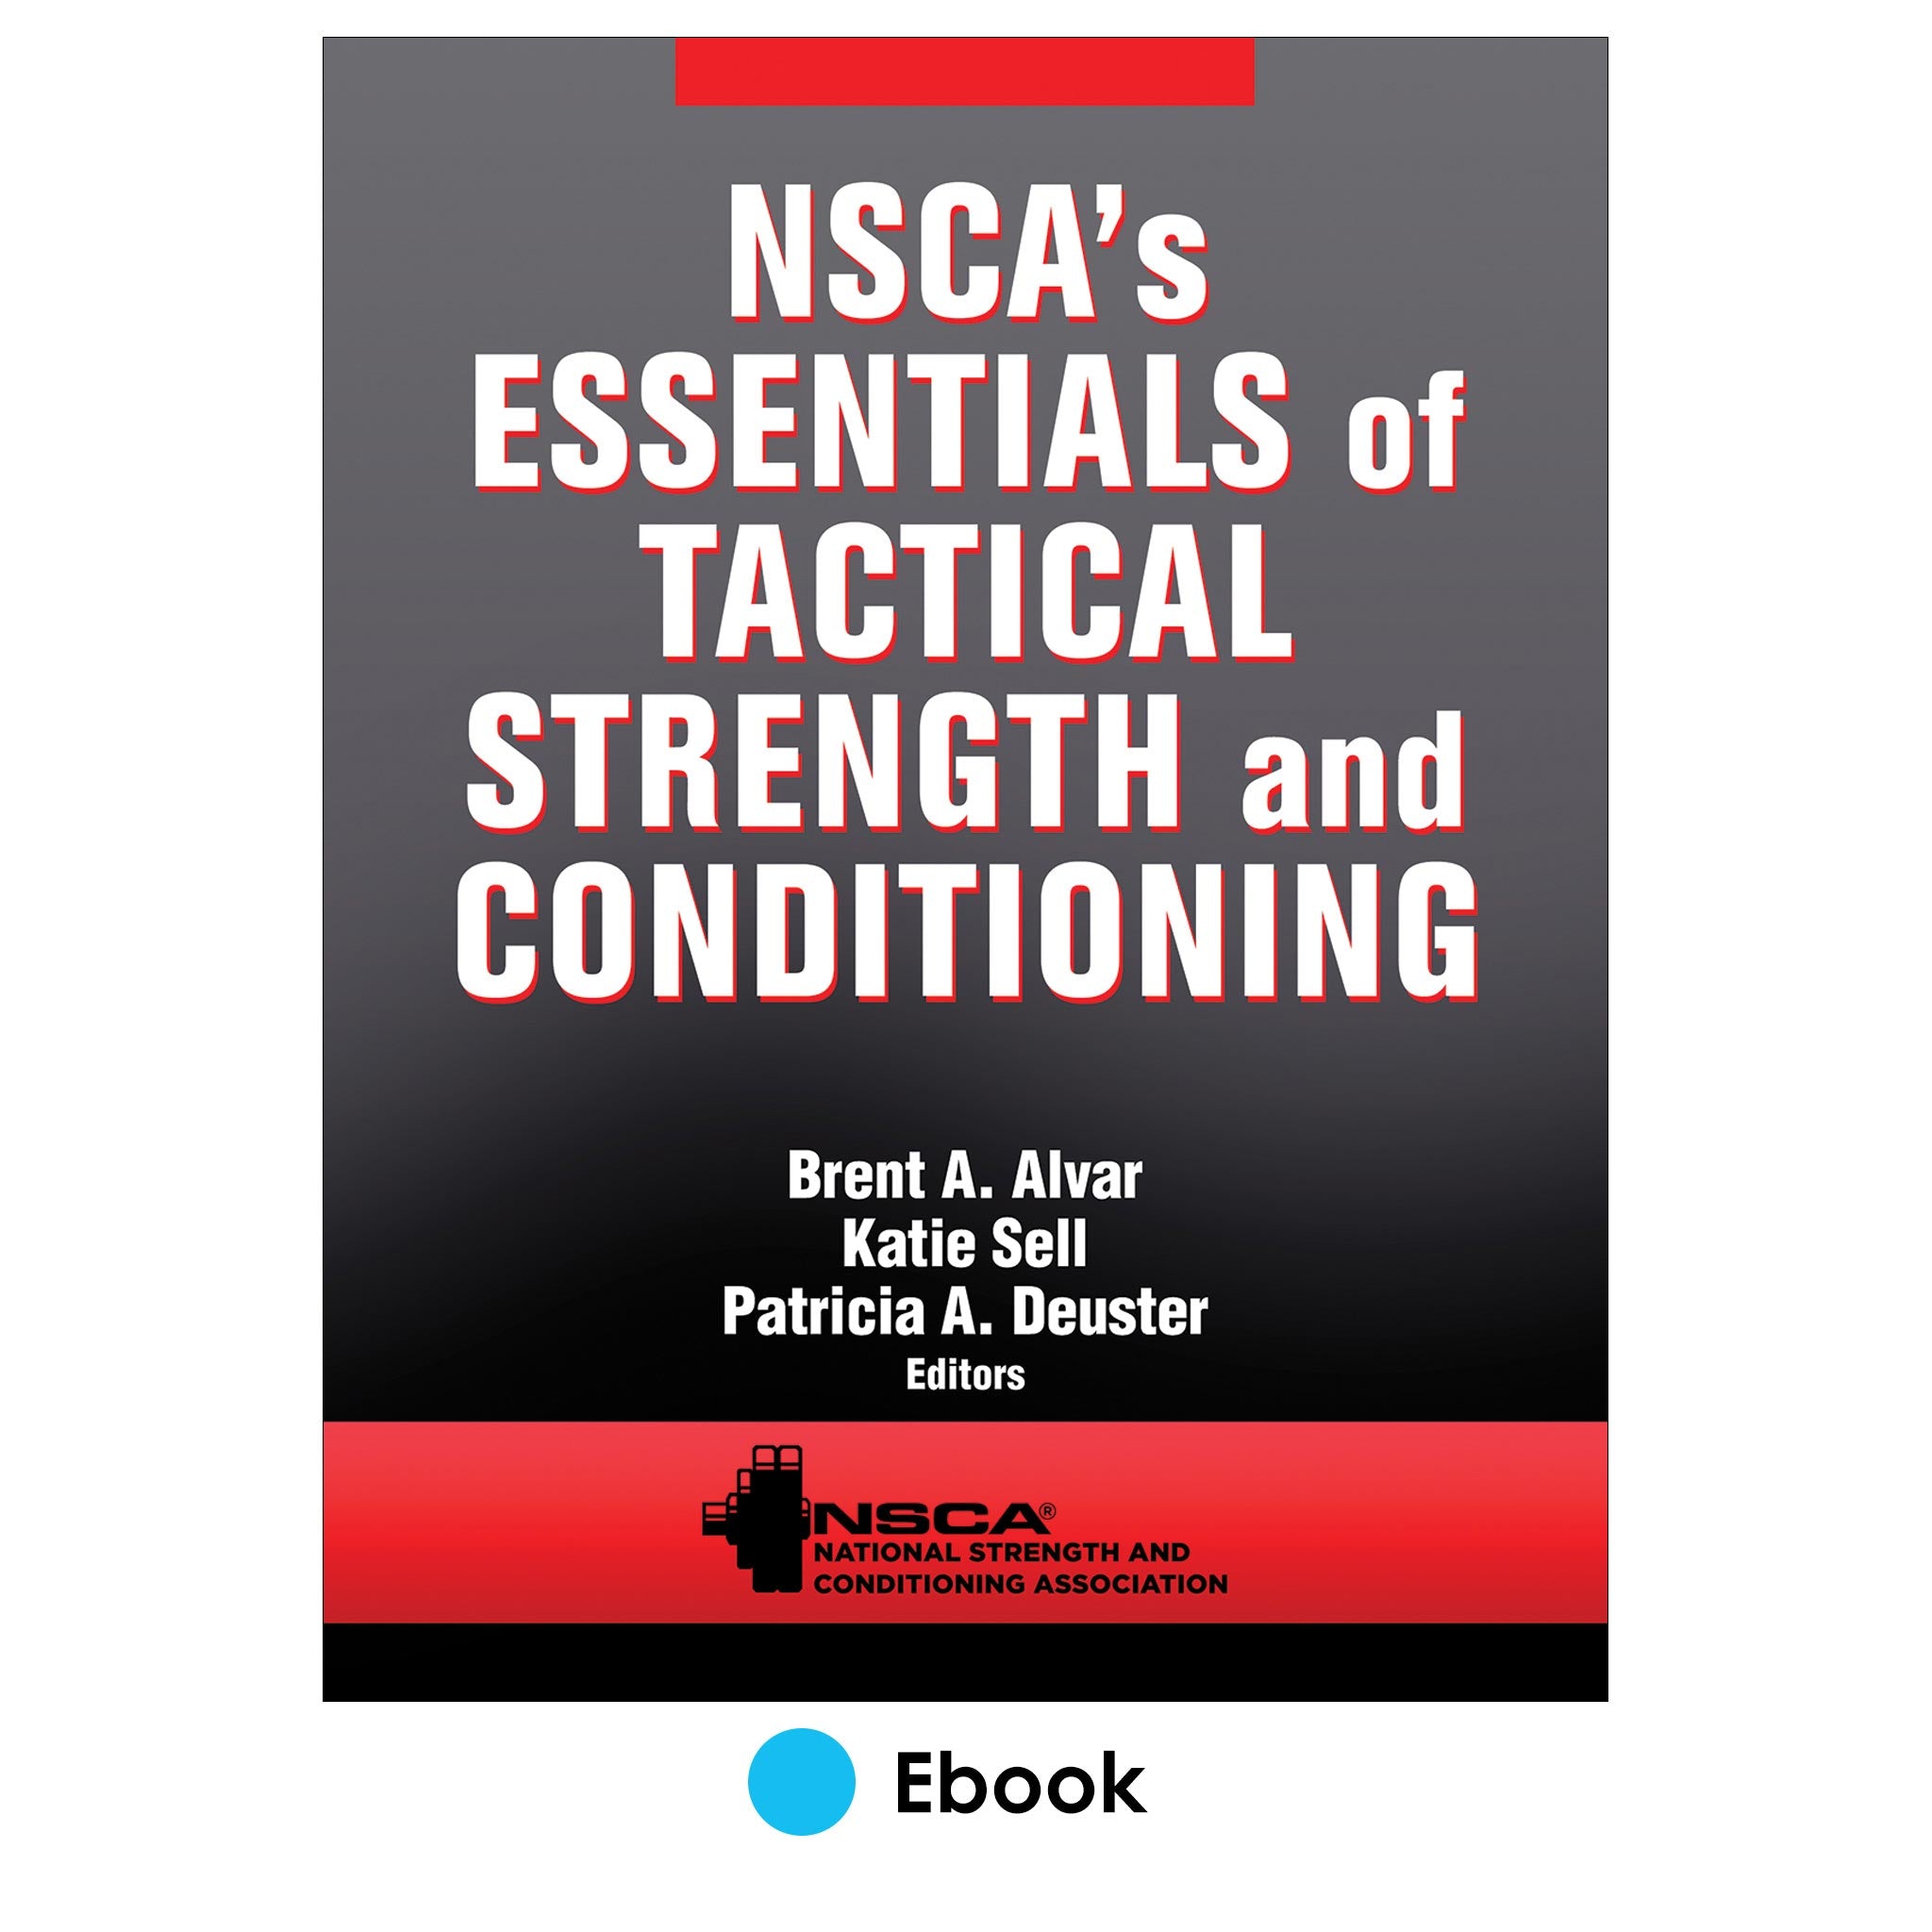 NSCA's Essentials of Tactical Strength and Conditioning PDF 